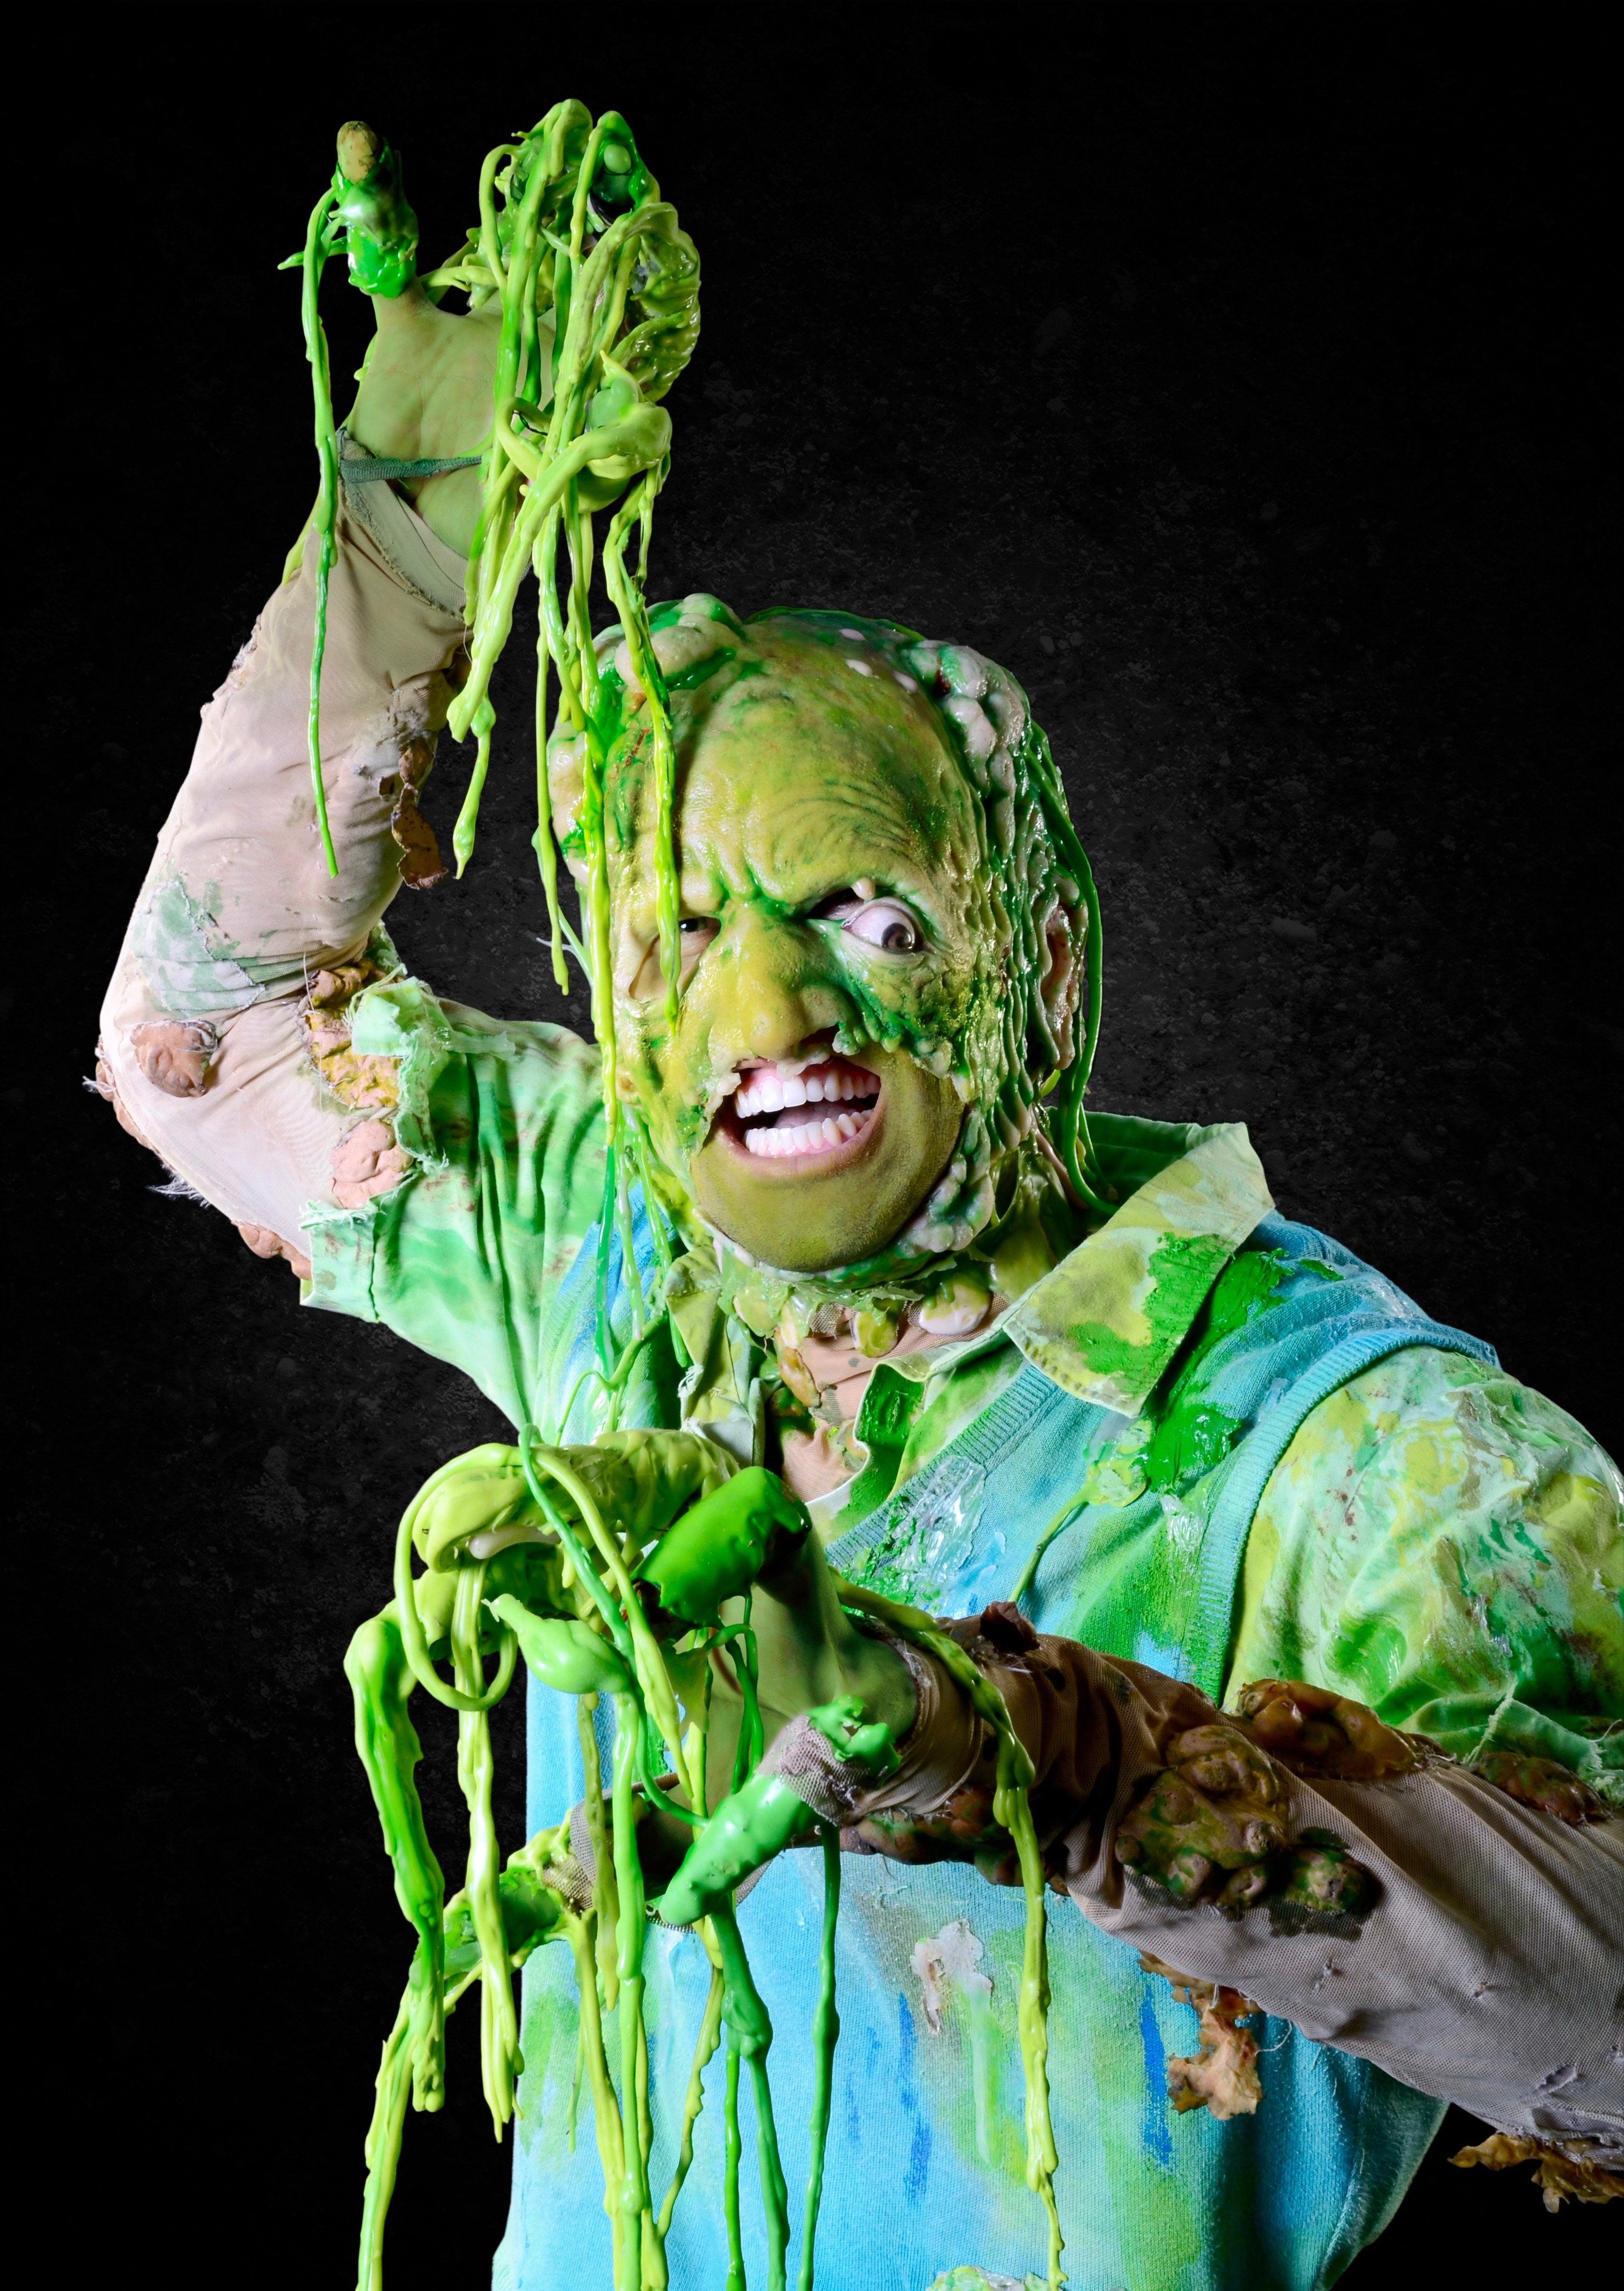 Climate-change skeptics beware: The Toxic Avenger (Evan Ruggiero) will not be denied.